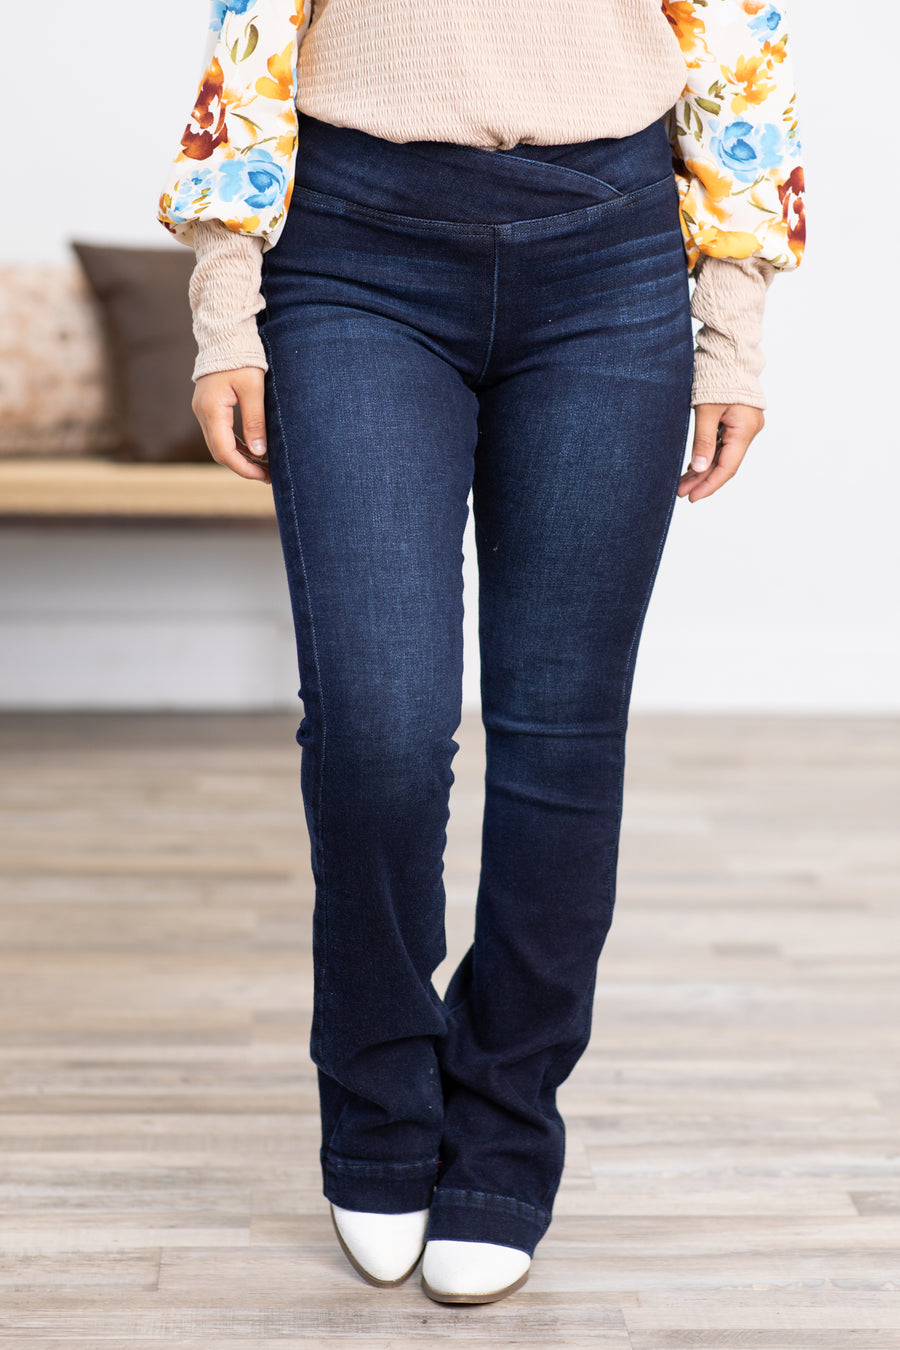 KanCan Crossover Waist Pull On Bootcut Jeans